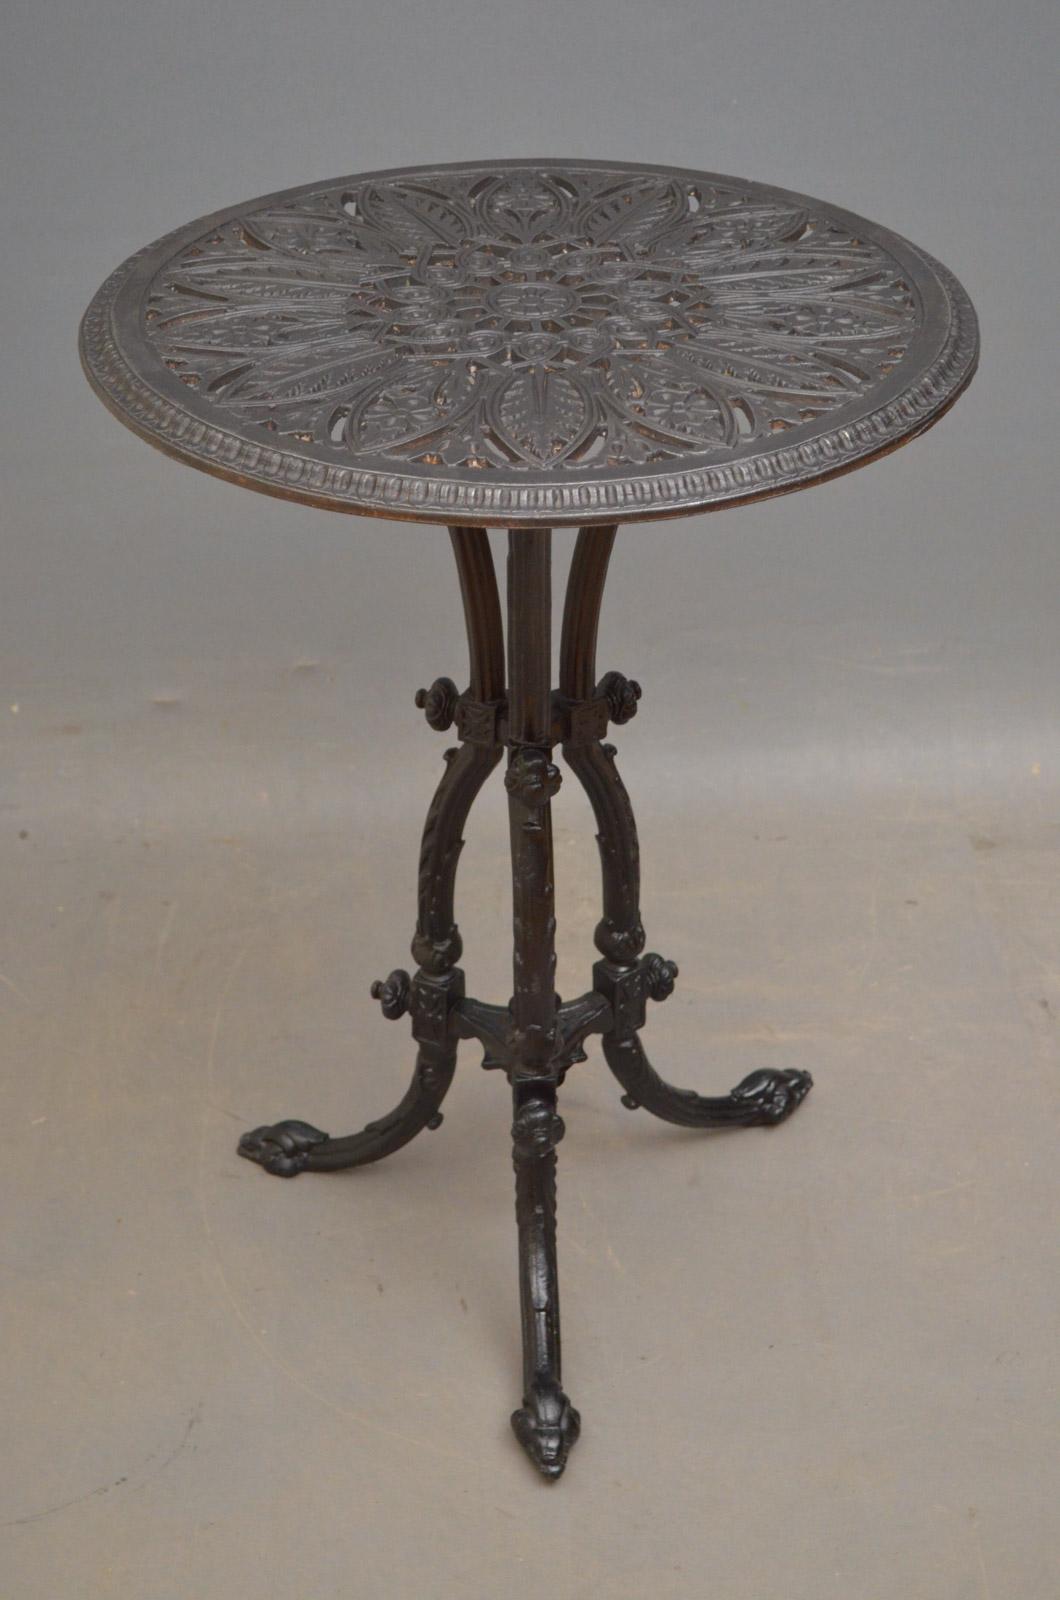 Sn4538 Victorian cast iron garden table, having fretwork top supported on 3 shaped uprights terminating in pad feet. This table is in fantastic condition throughout - ready to place at home, garden or conservatory, circa 1880
Measures: Height 27